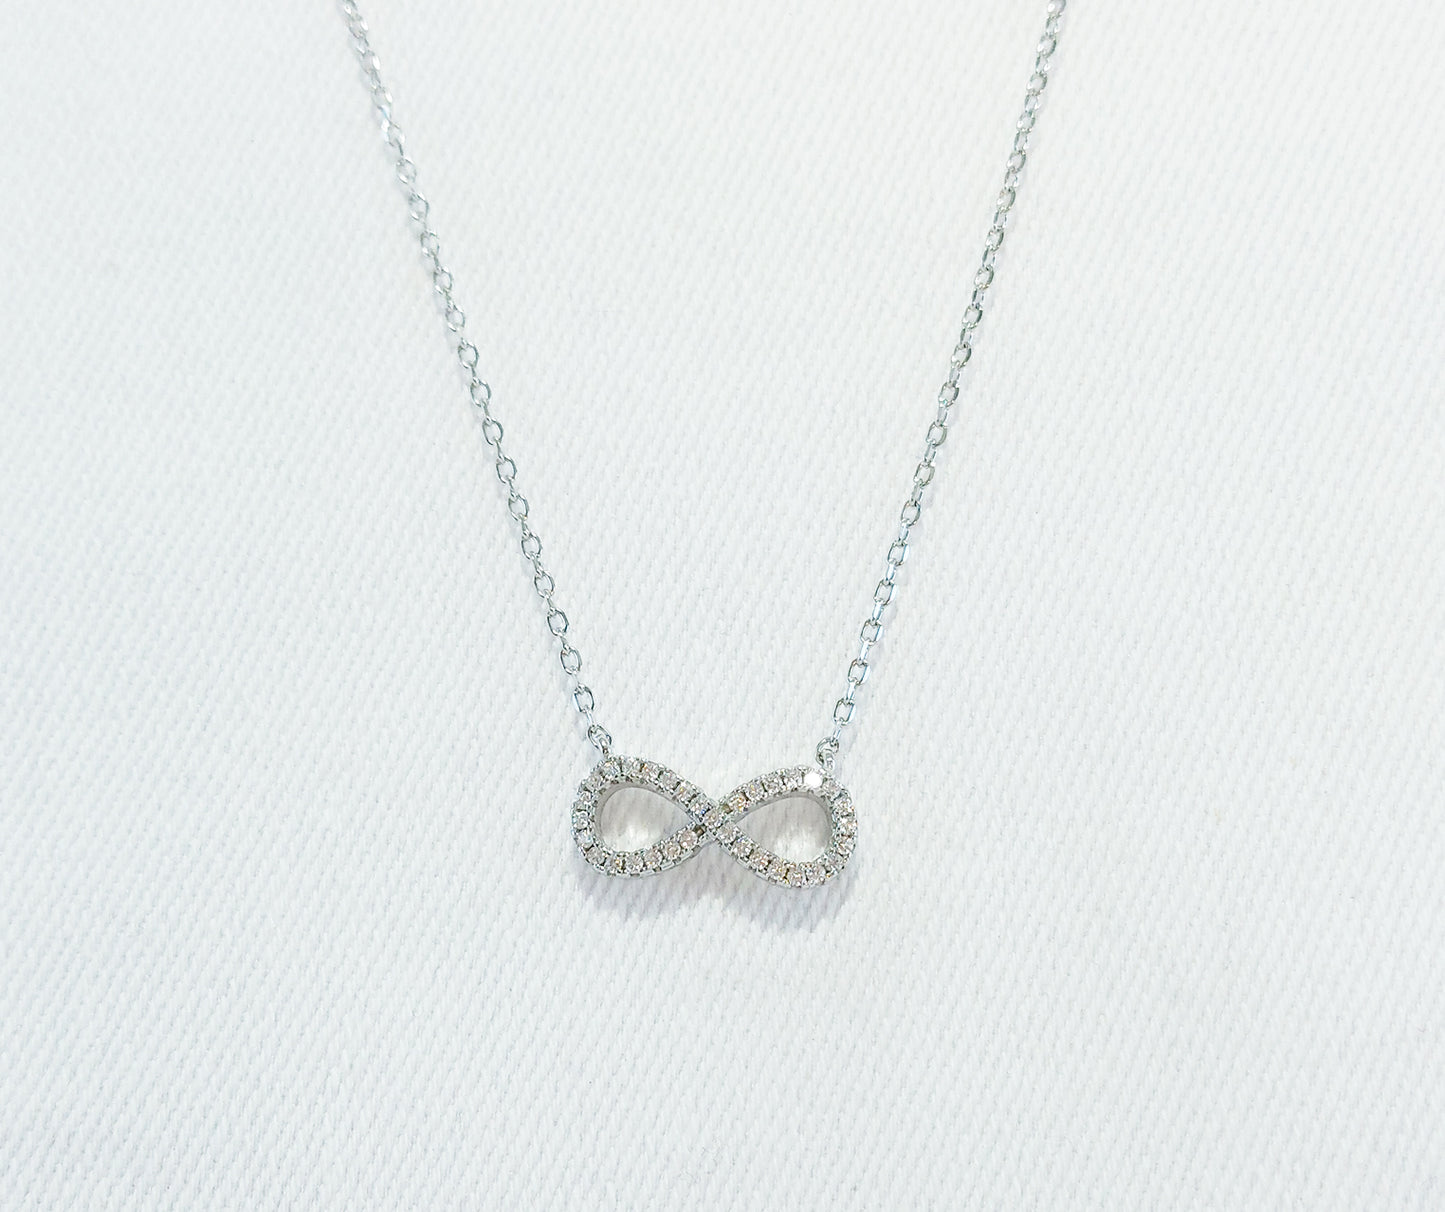 Sterling Silver Cubic Zirconia Necklace. Infinity Symbol Design